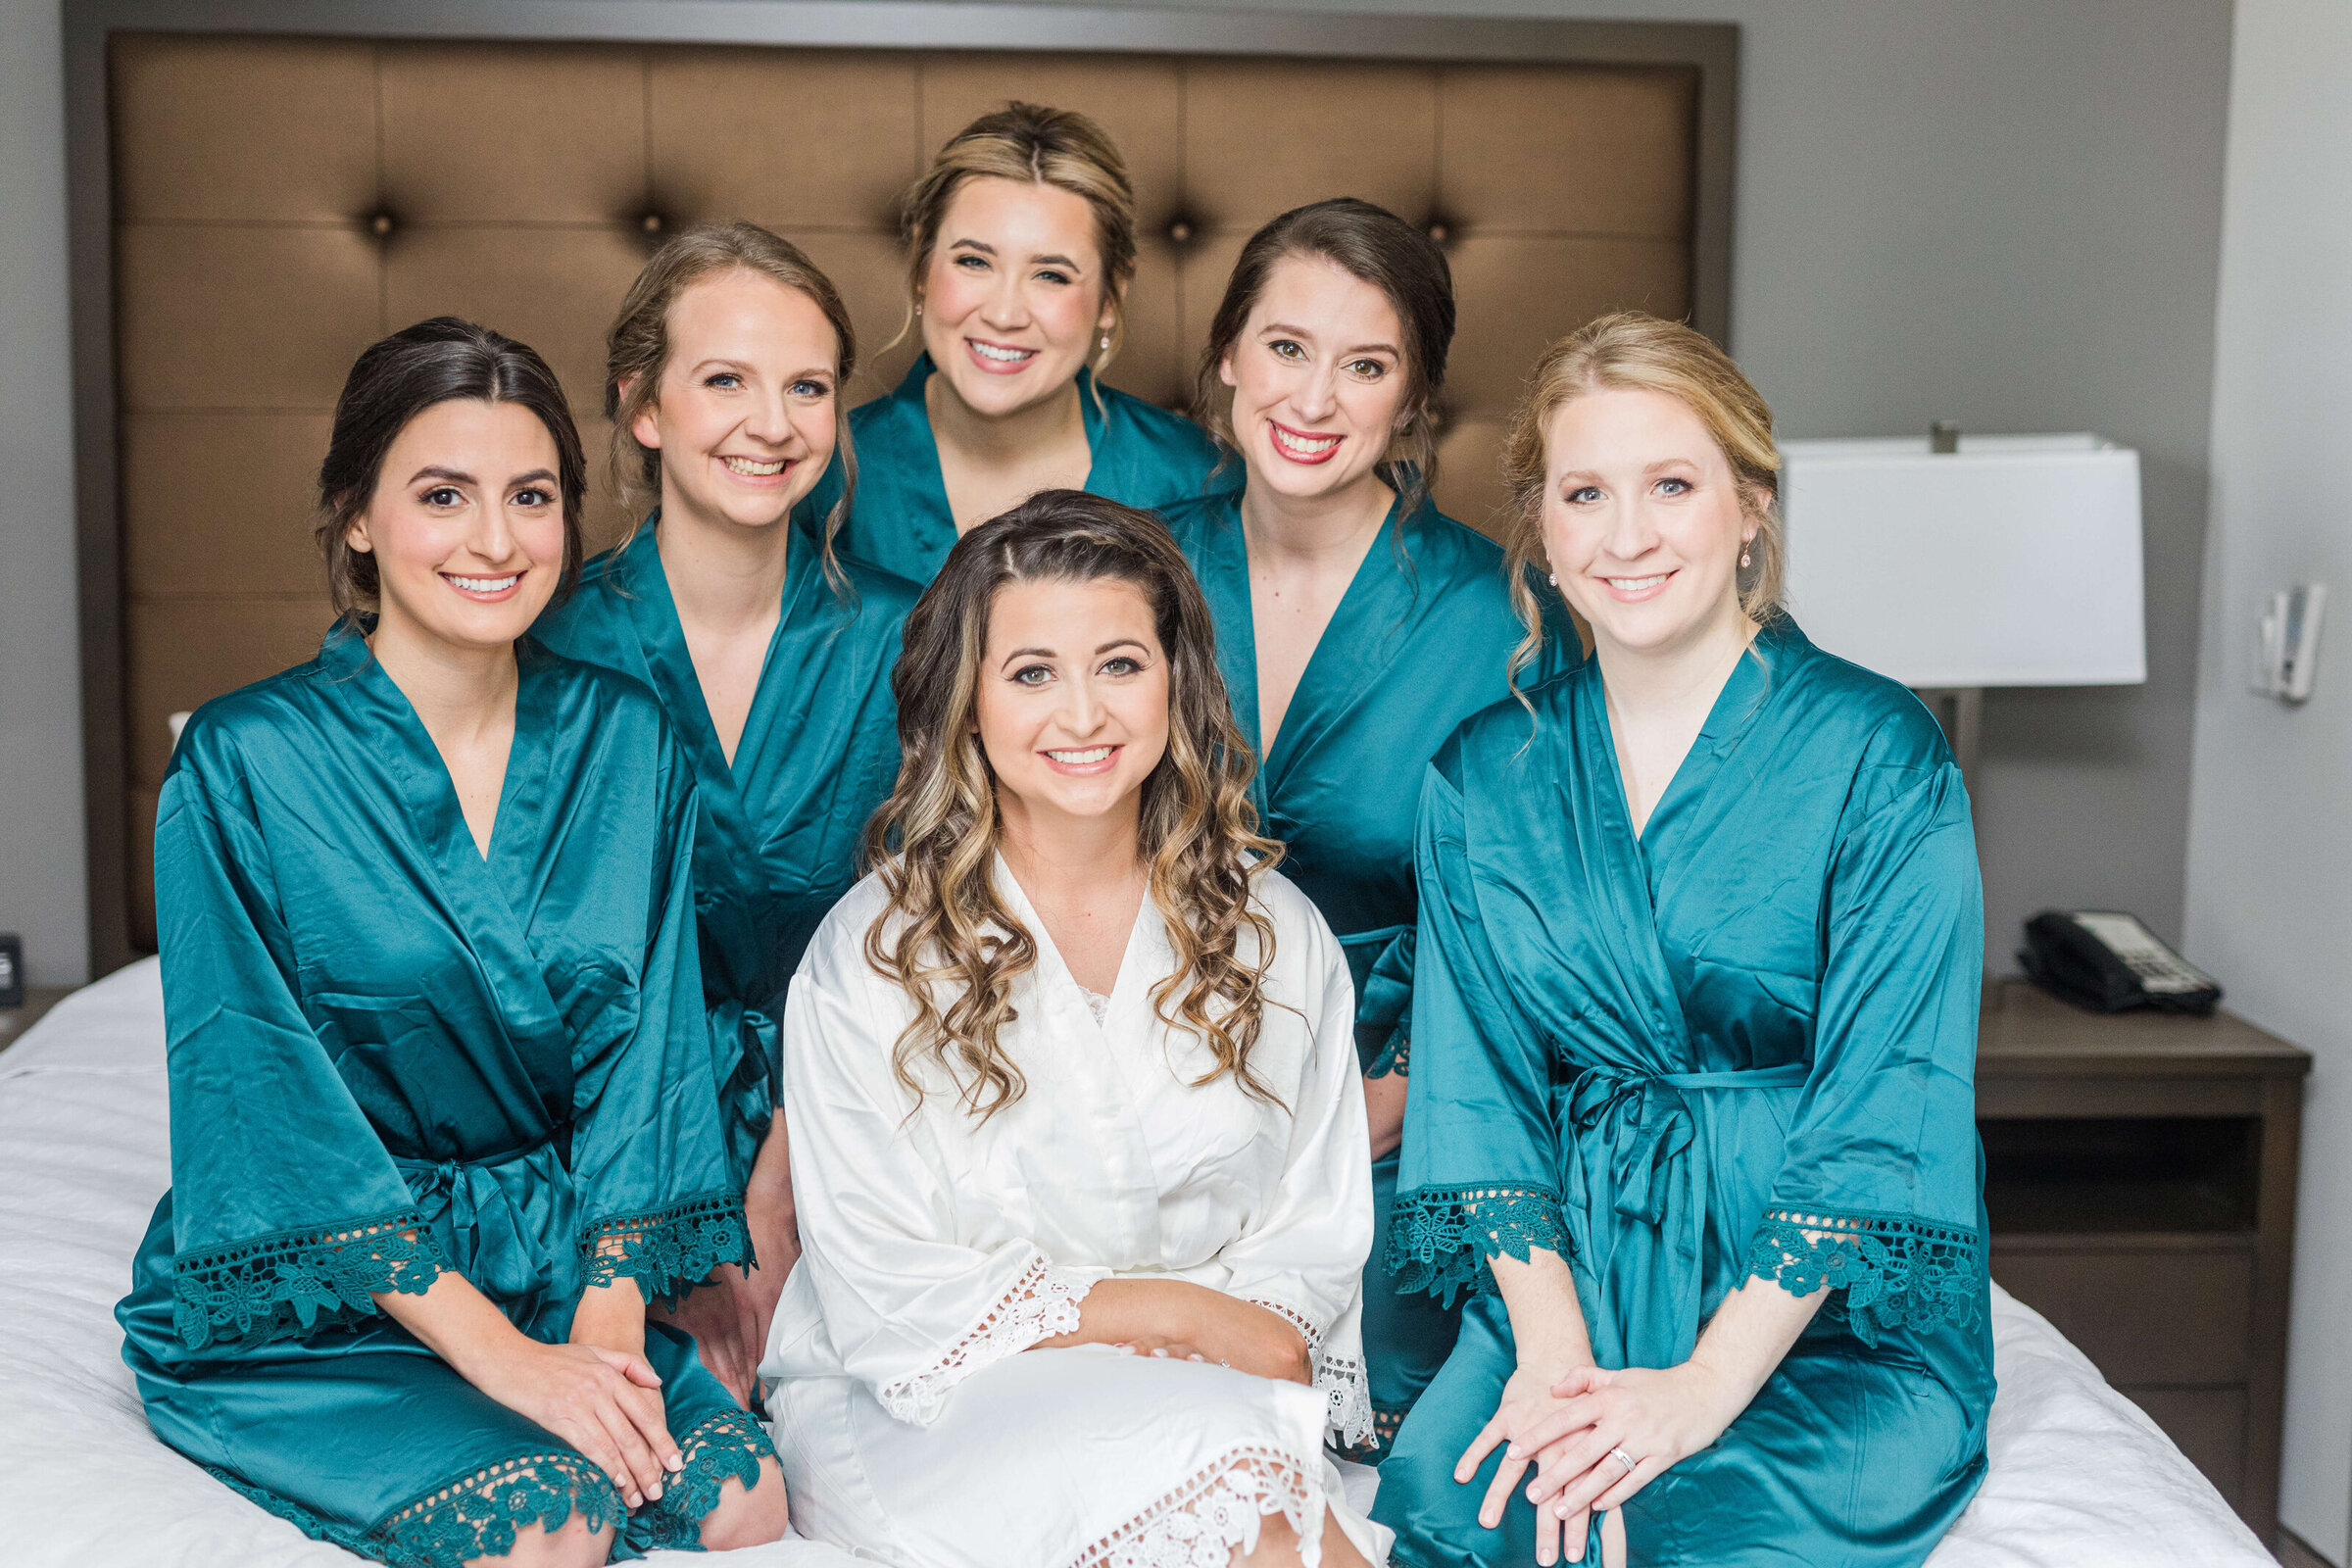 A bride in her white robe and bridesmaids in teal robes sit on a hotel bed smiling at the camera.